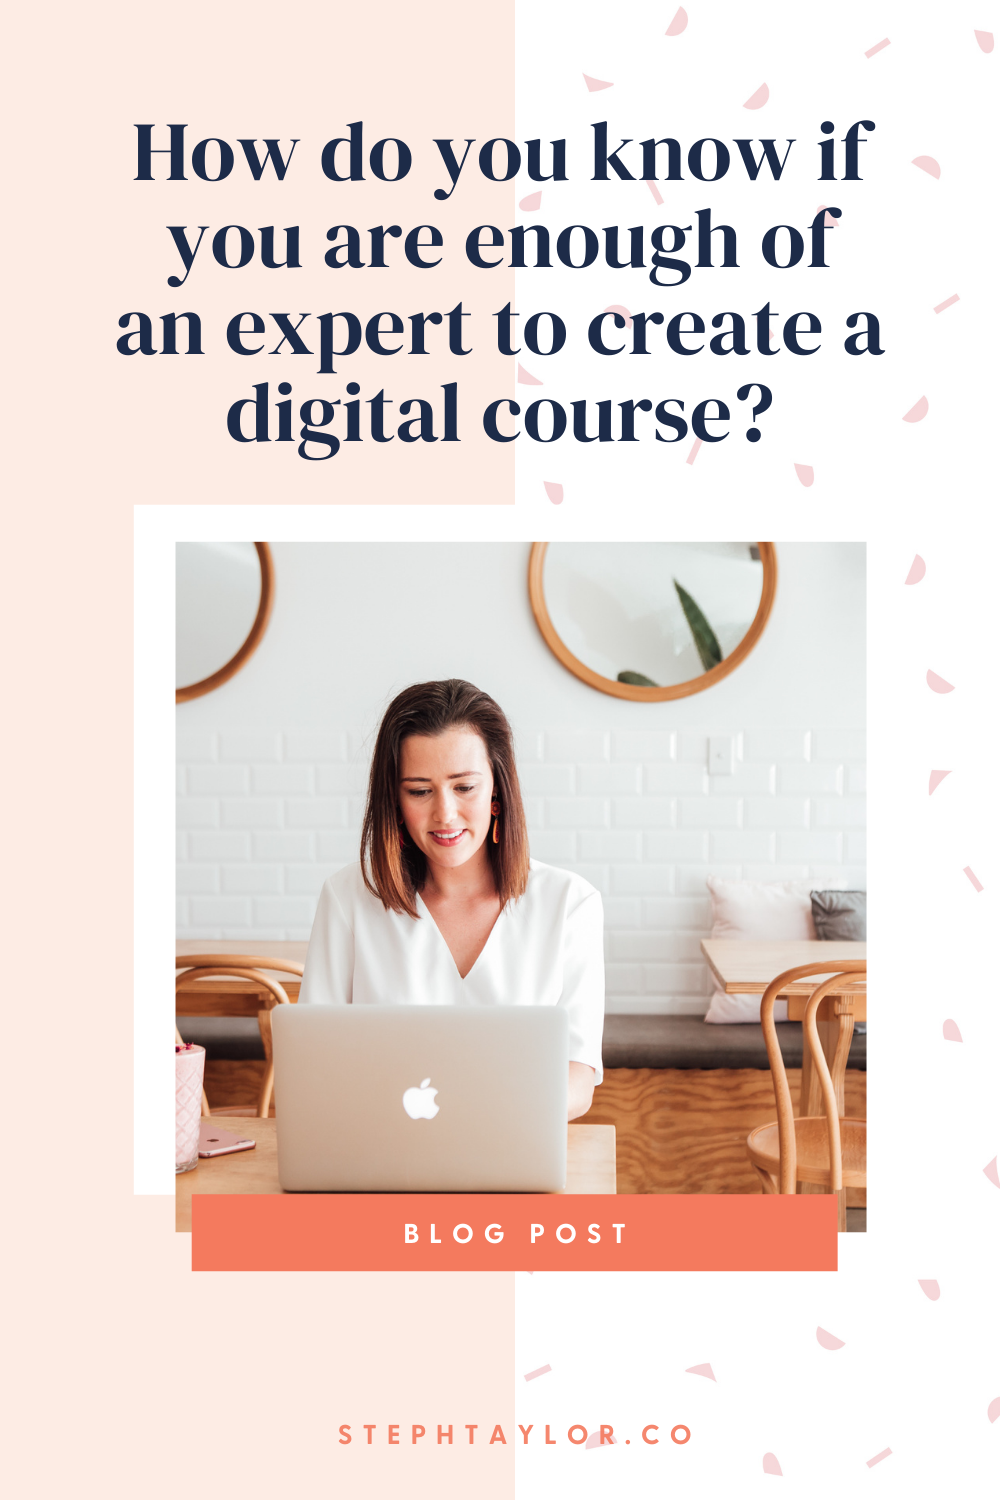 How do you know if you are enough of an expert to create a digital course?